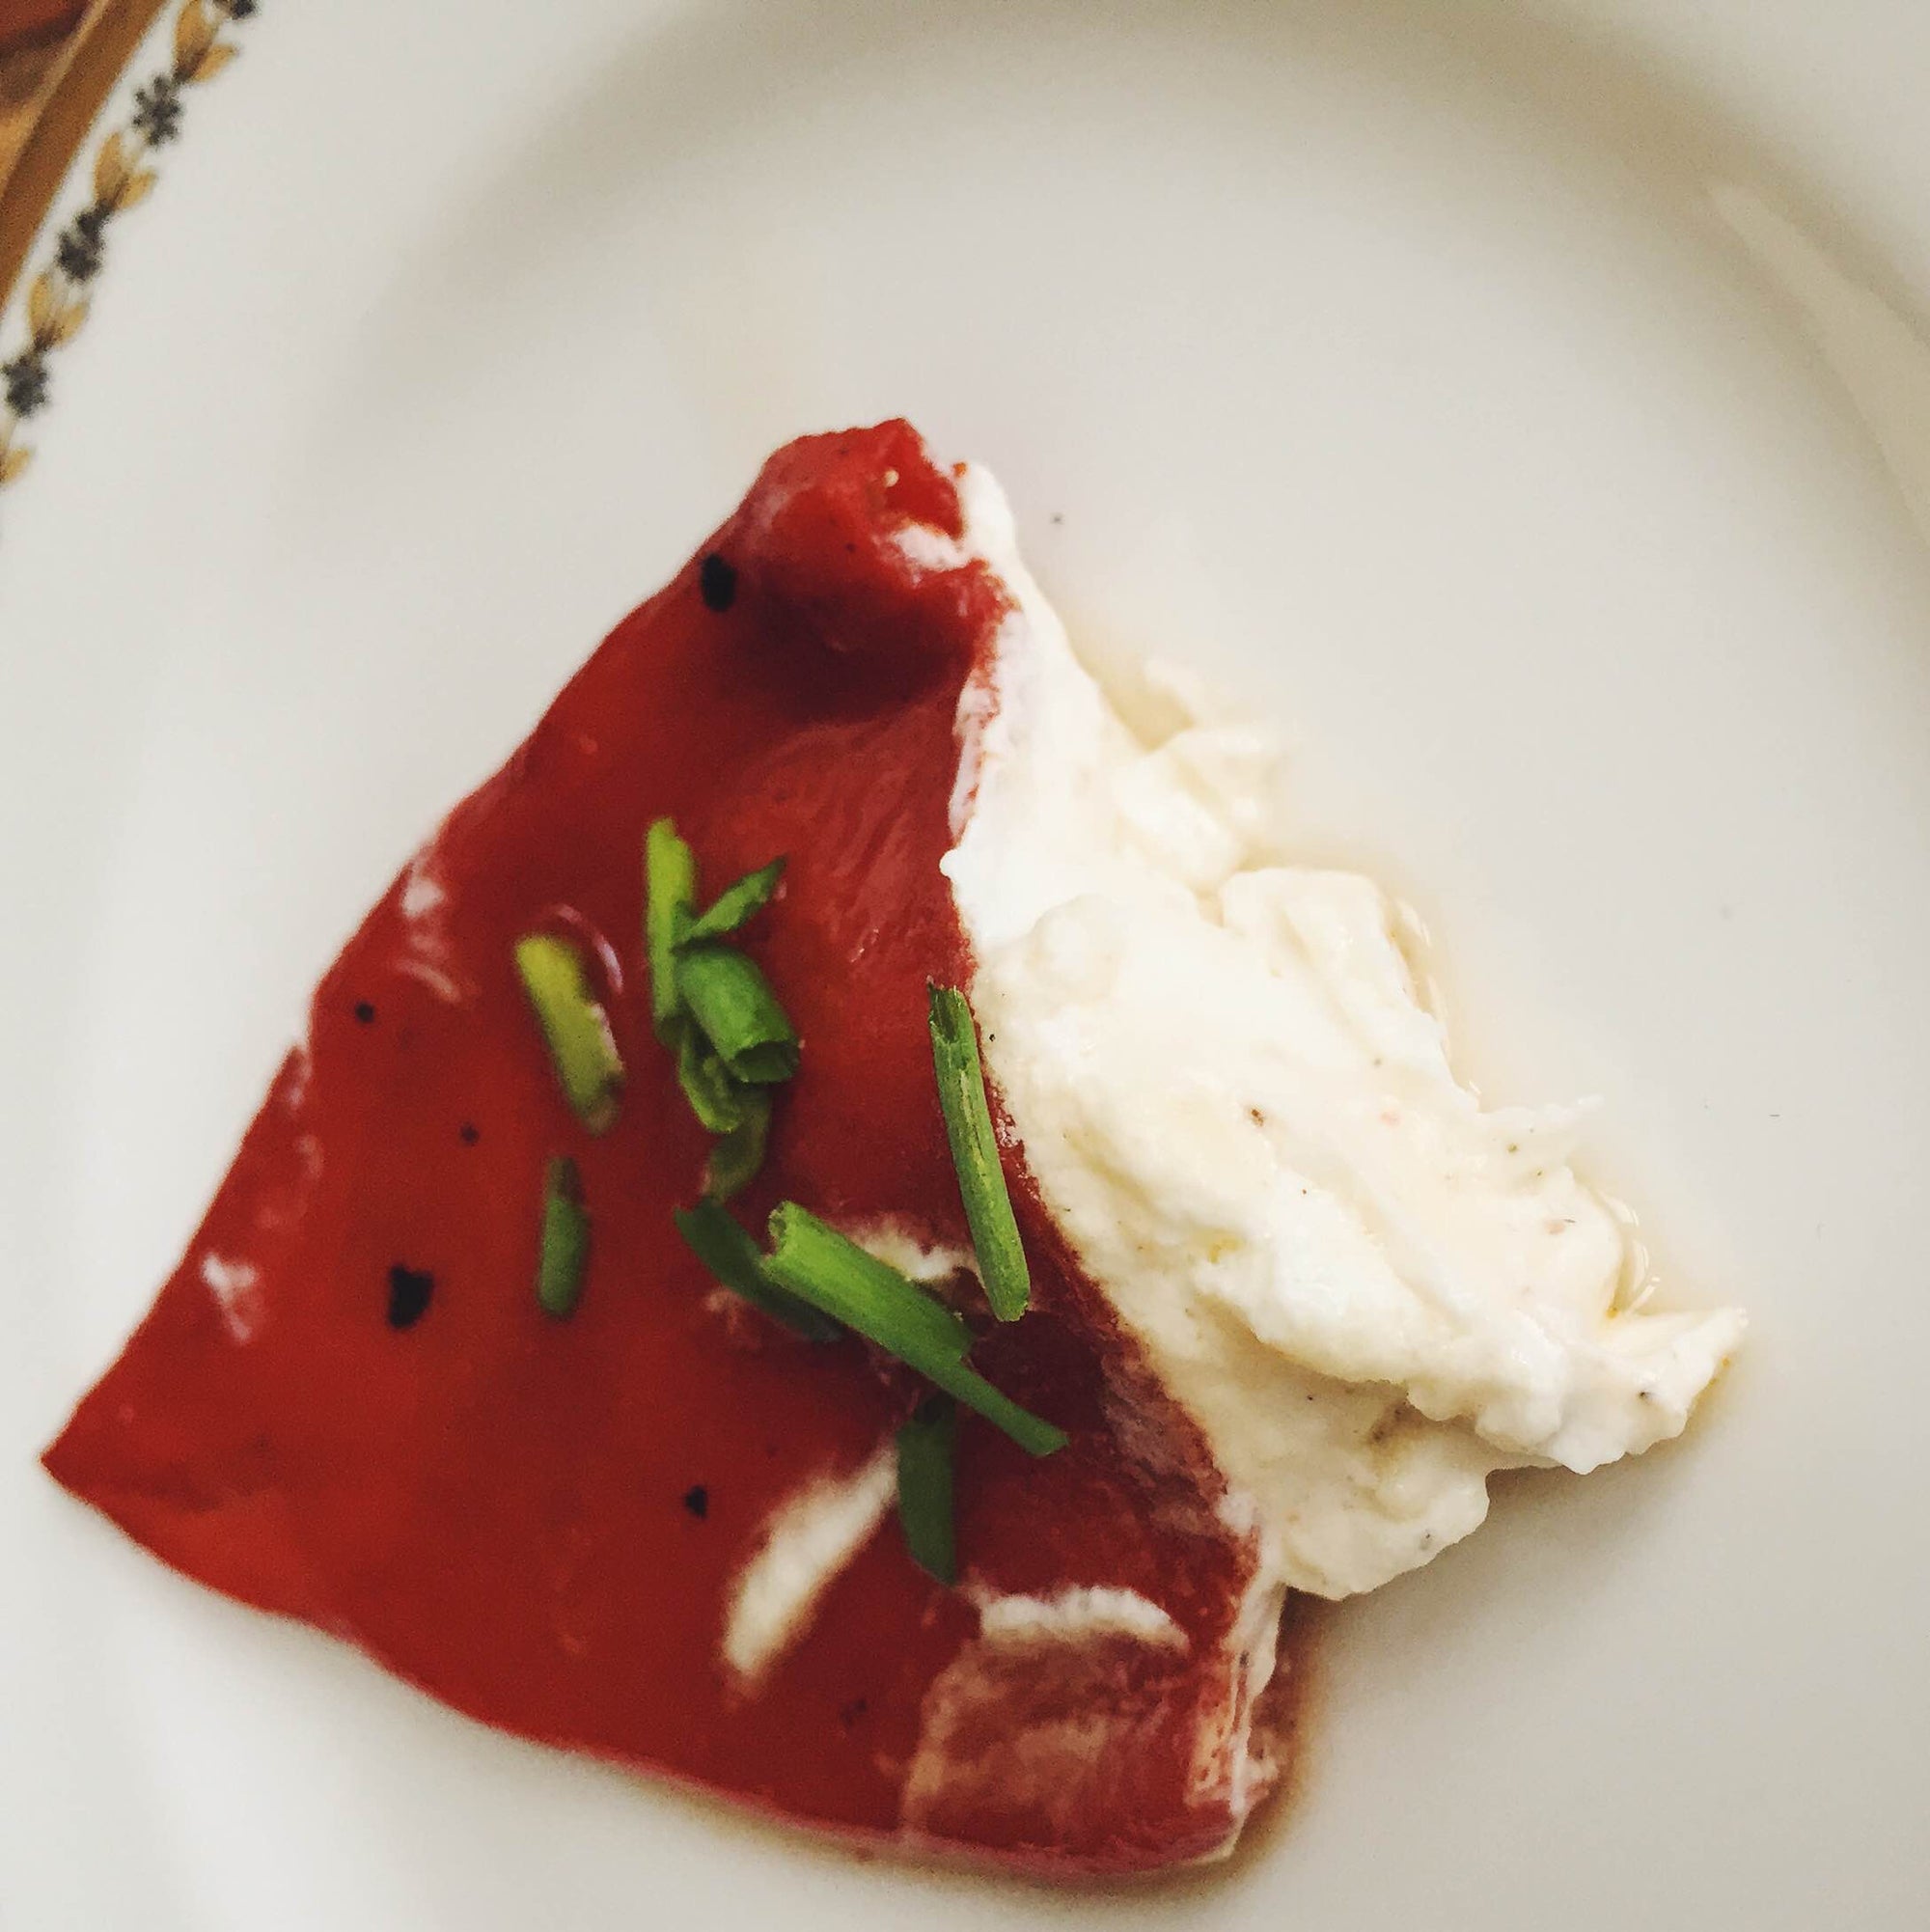 Pan-Seared Piquillo Pepper stuffed with Goat Cheese